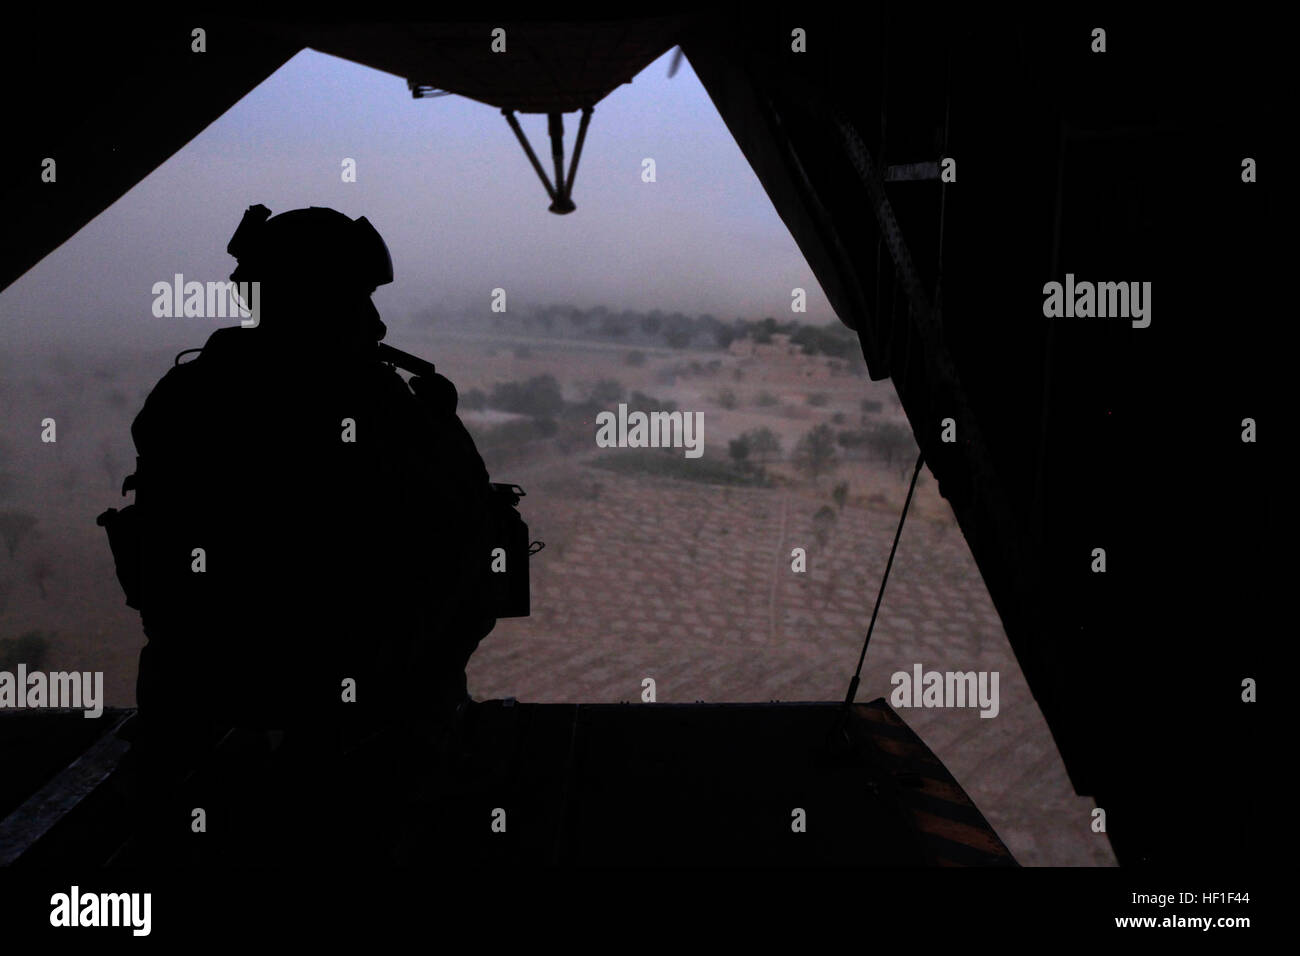 U.S. Marine Corps Cpl. Ryan P. Wells, a crew chief with Marine Heavy Helicopter Squadron 462 (HMH-462), provides aerial security over Helmand province, Afghanistan, Aug. 31, 2013. HMH-462 transported Marines with Golf Company, 2nd Battalion, 8th Marines, Afghan Territorial Force 444 and British soldiers during a joint interdiction operation. (U.S. Marine Corps photo by Sgt. Gabriela Garcia/Released) HMH-462 Supports 2-8, ATF-444 and British Soldiers in Qal'ah-ye Badam 130831-M-SA716-065 Stock Photo